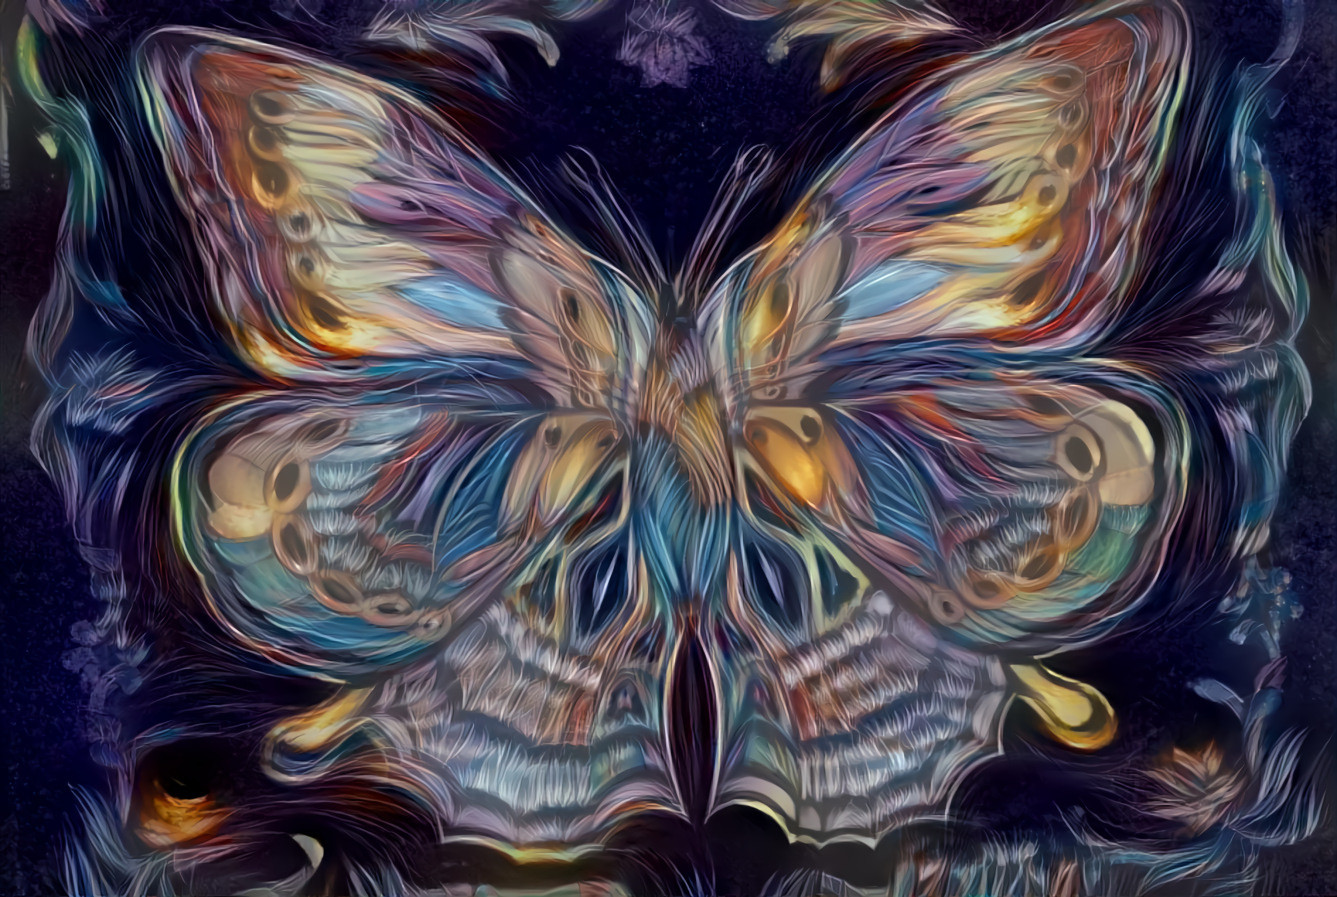 Beyond the butterfly scream